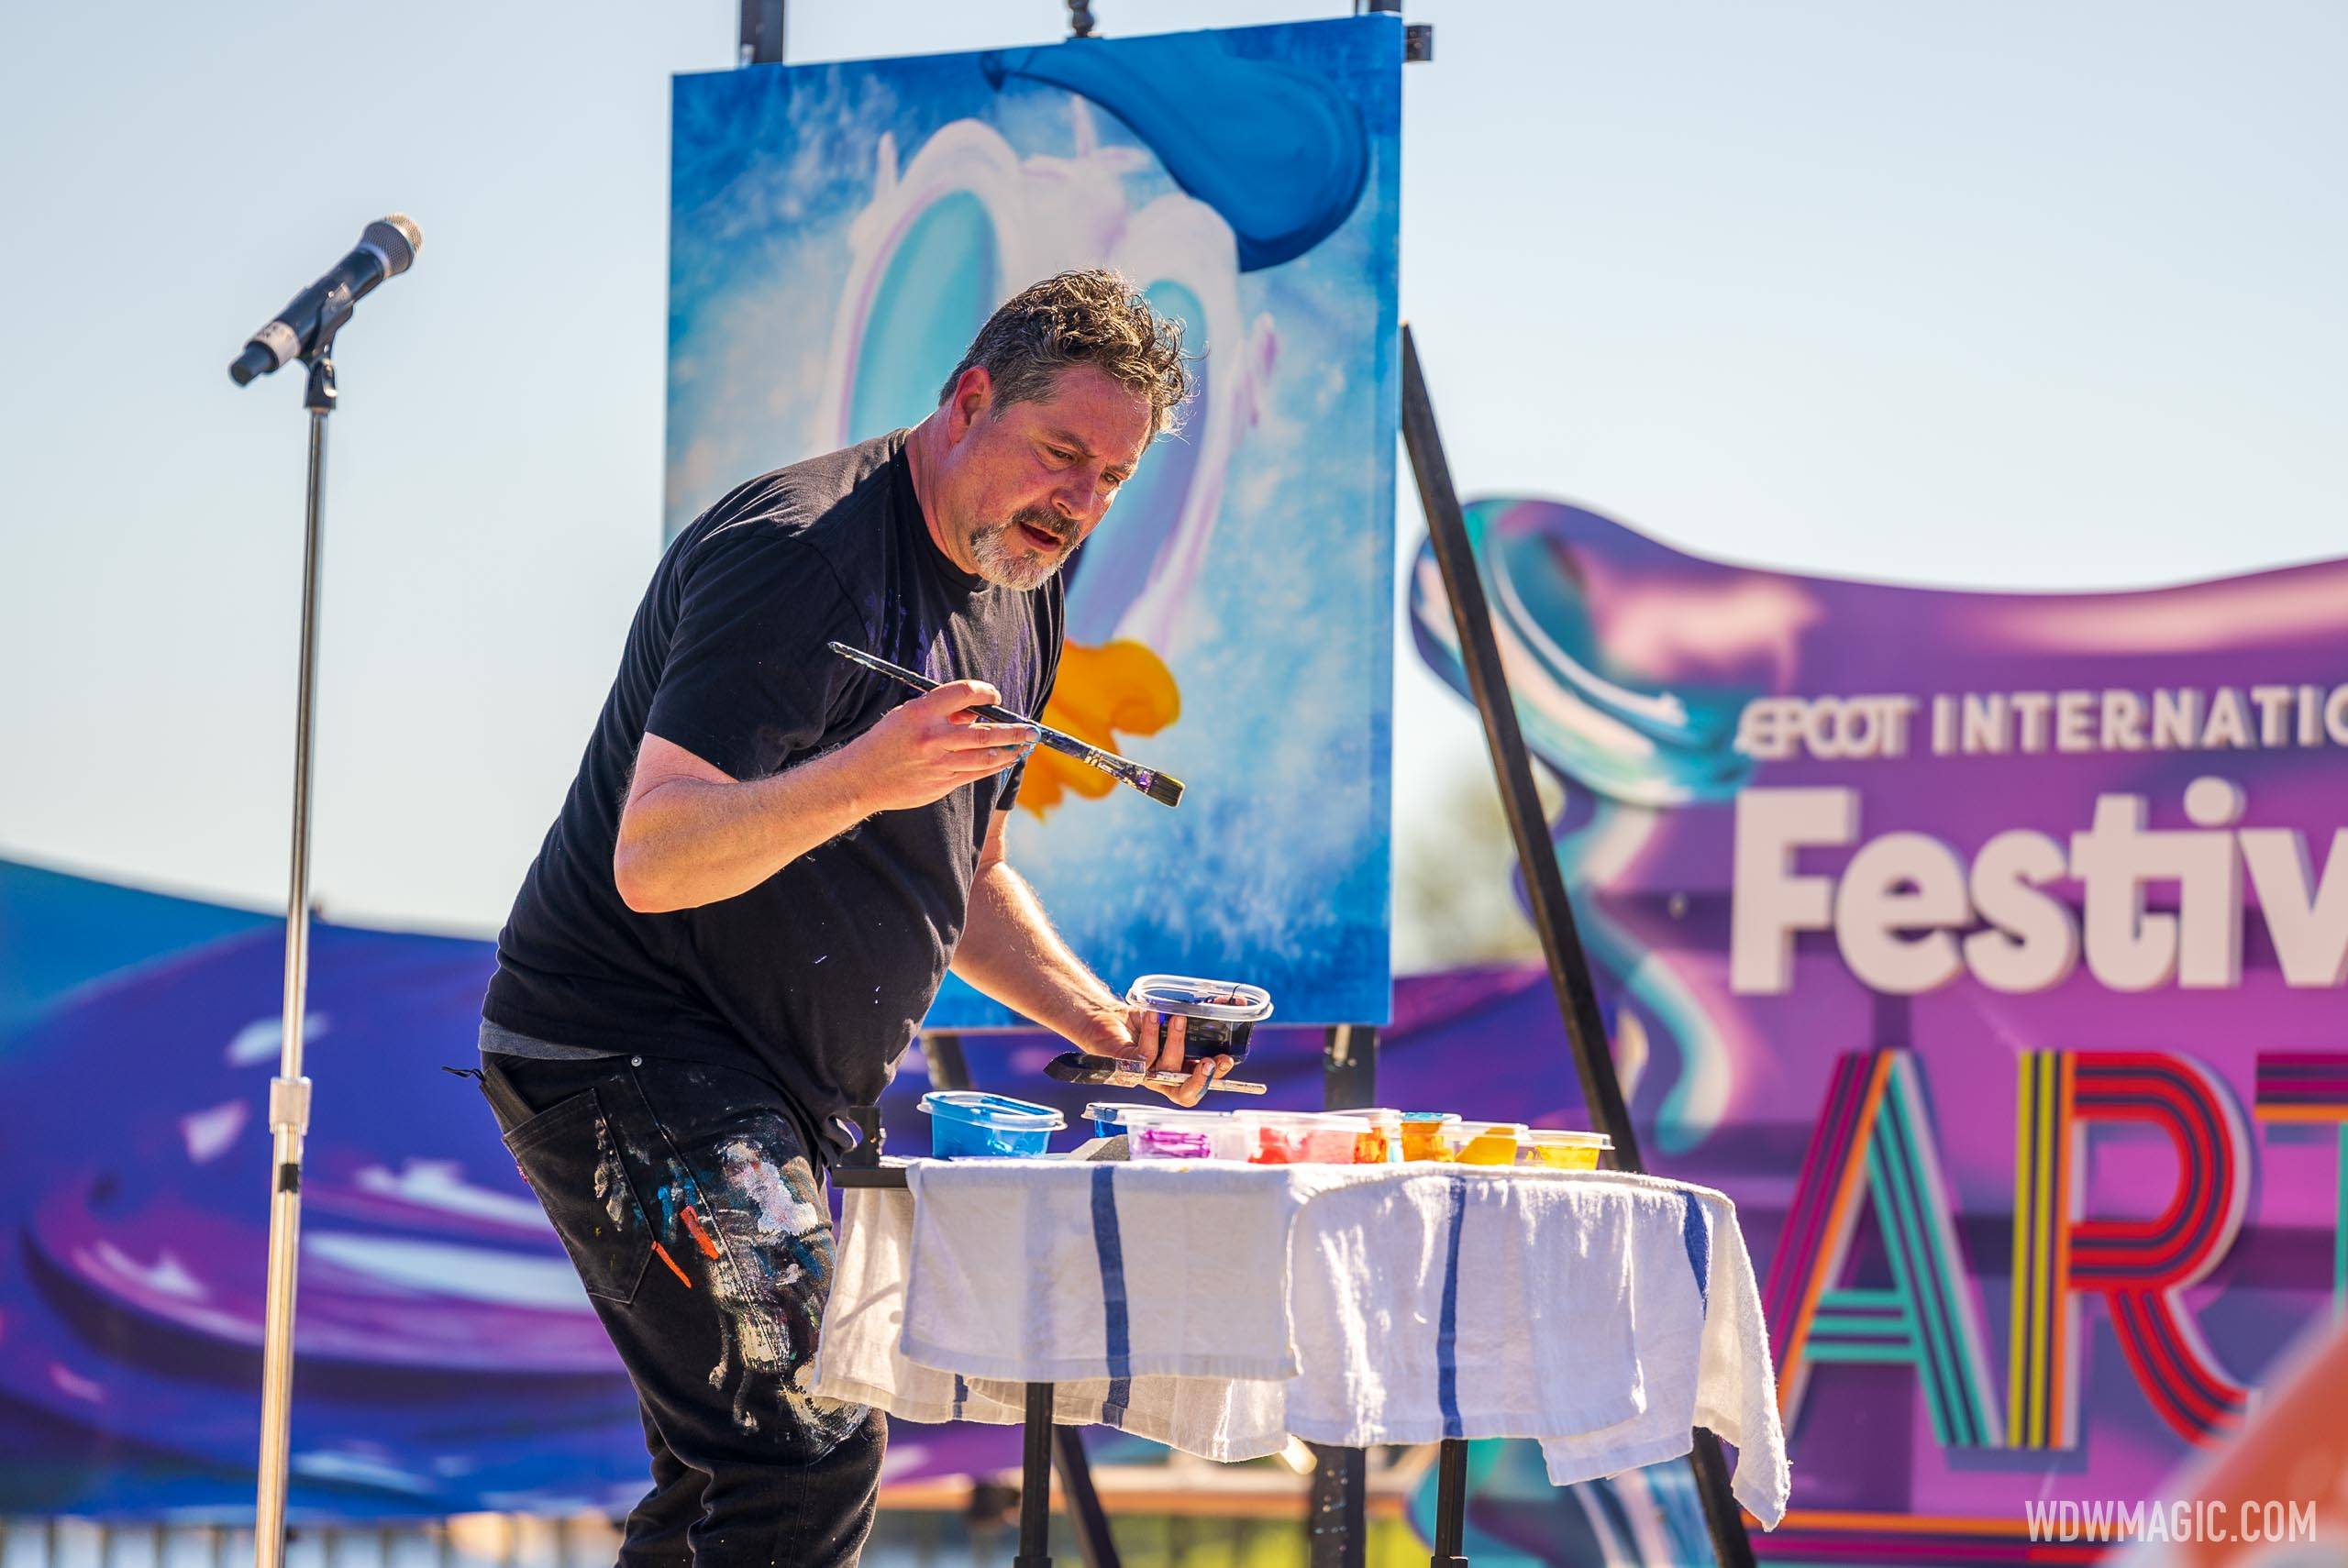 See amazing artists in World Showcase Plaza create works of art in a minutes